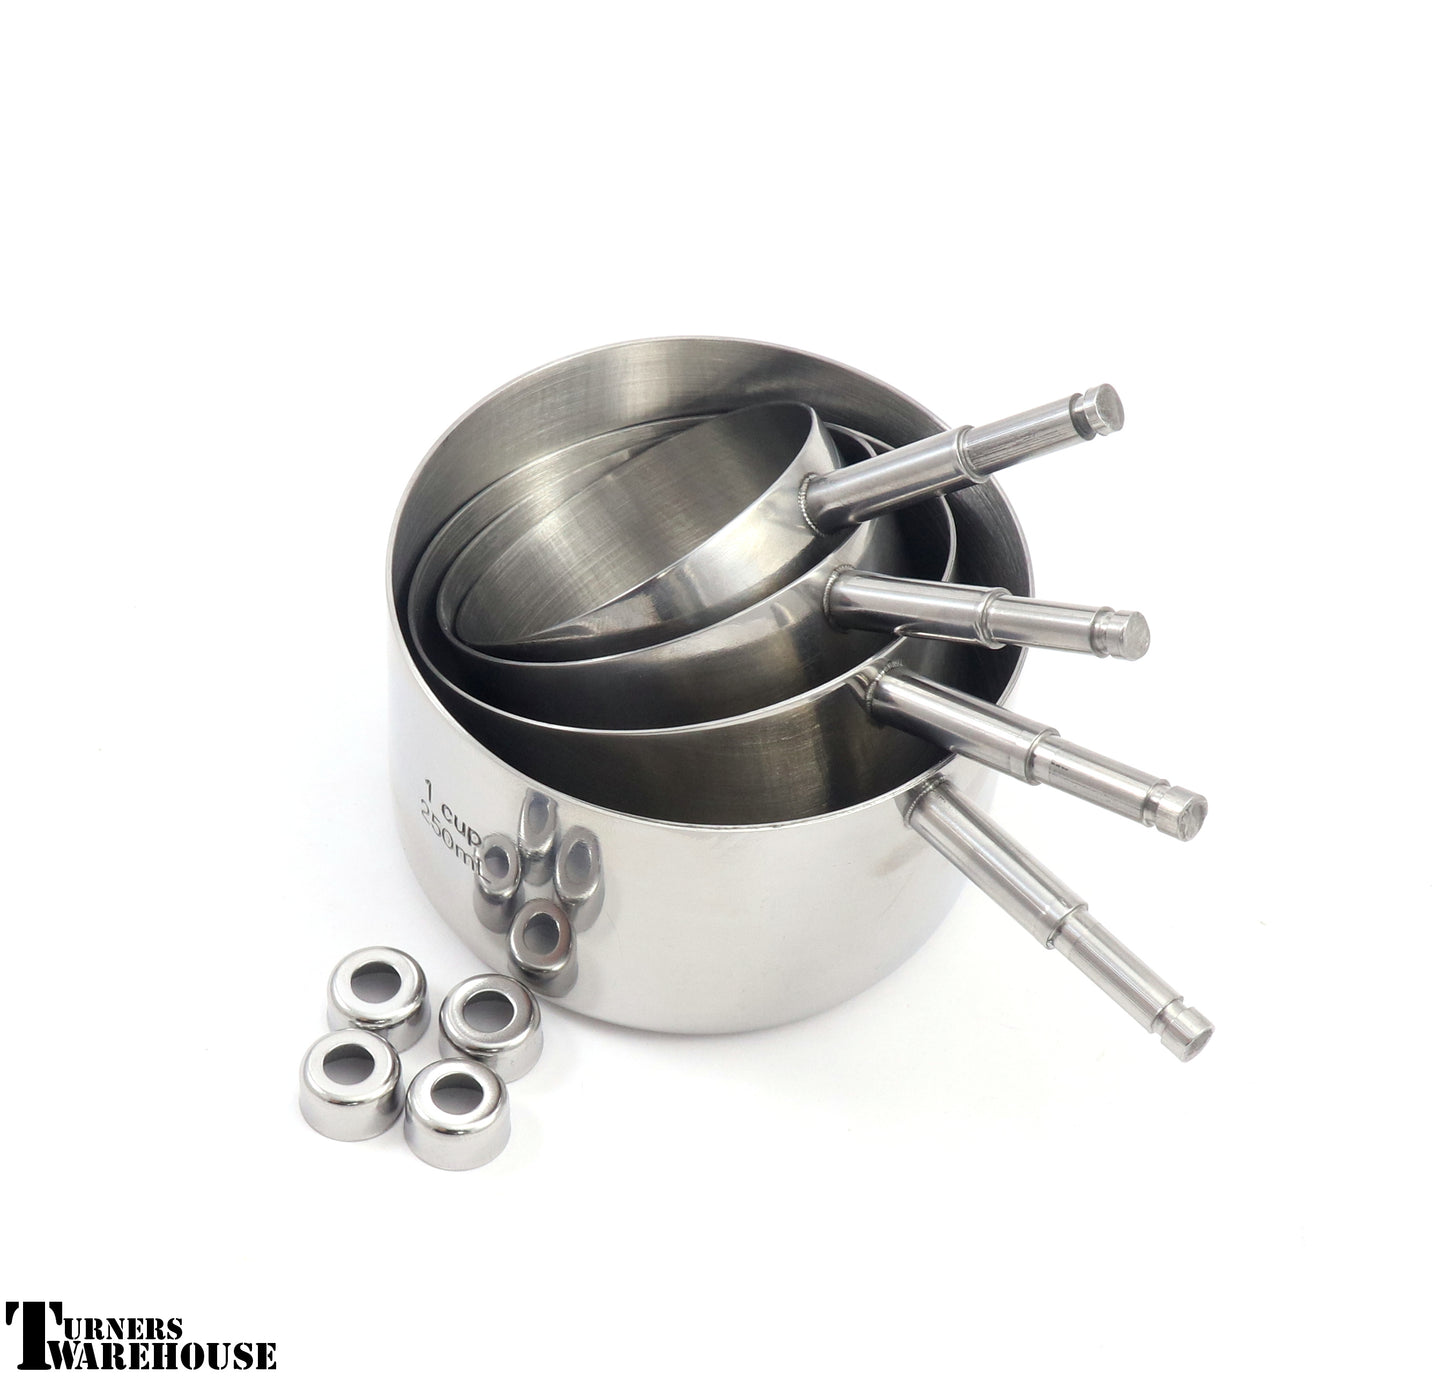 Measuring Cup Kit - Stainless Steel